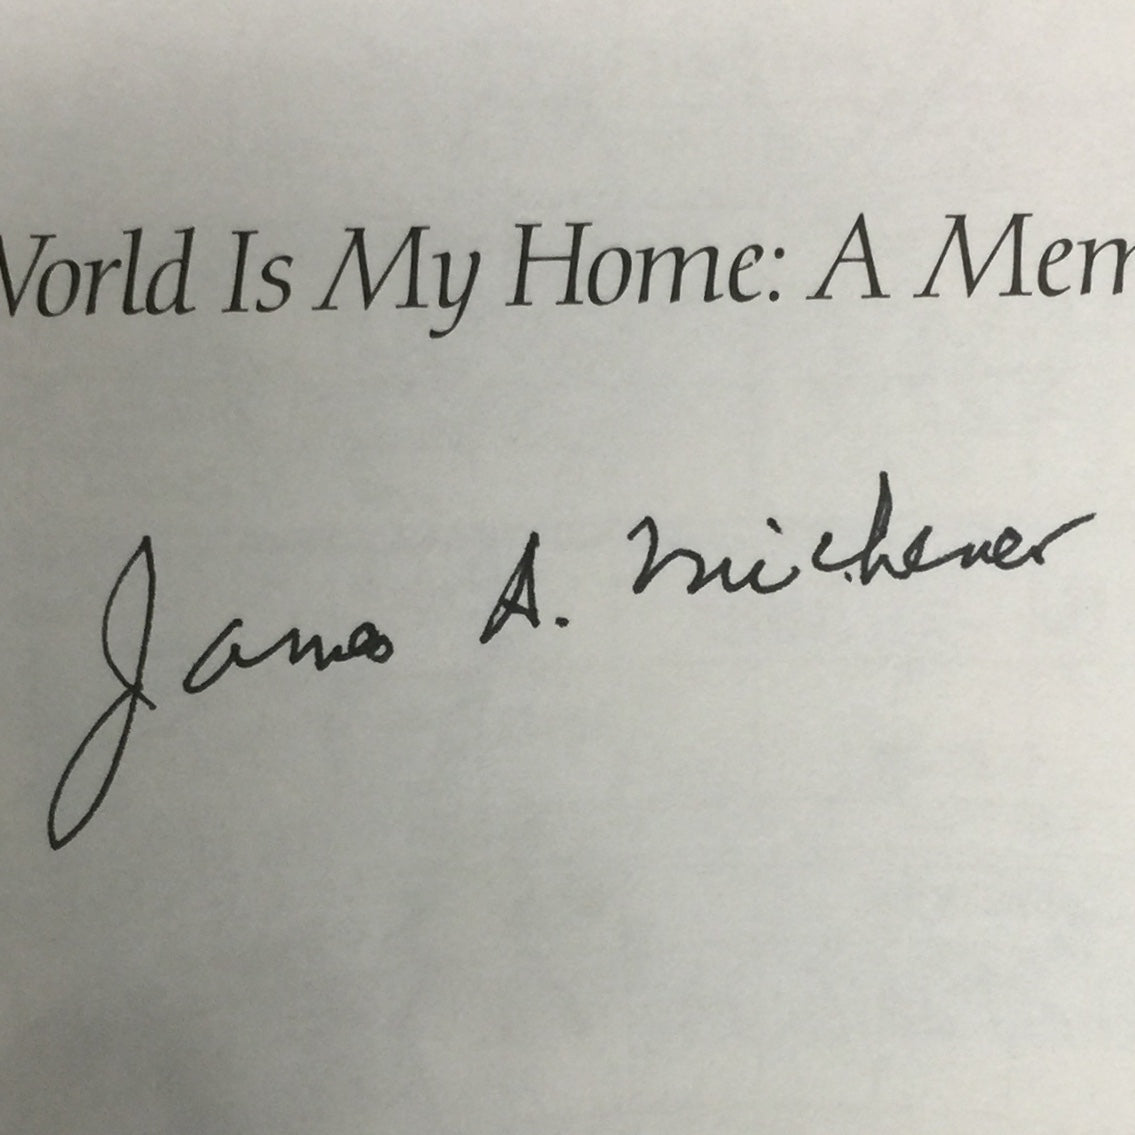 The World Is My Home - James A. Michener - Signed by Author - First Edition - 1992